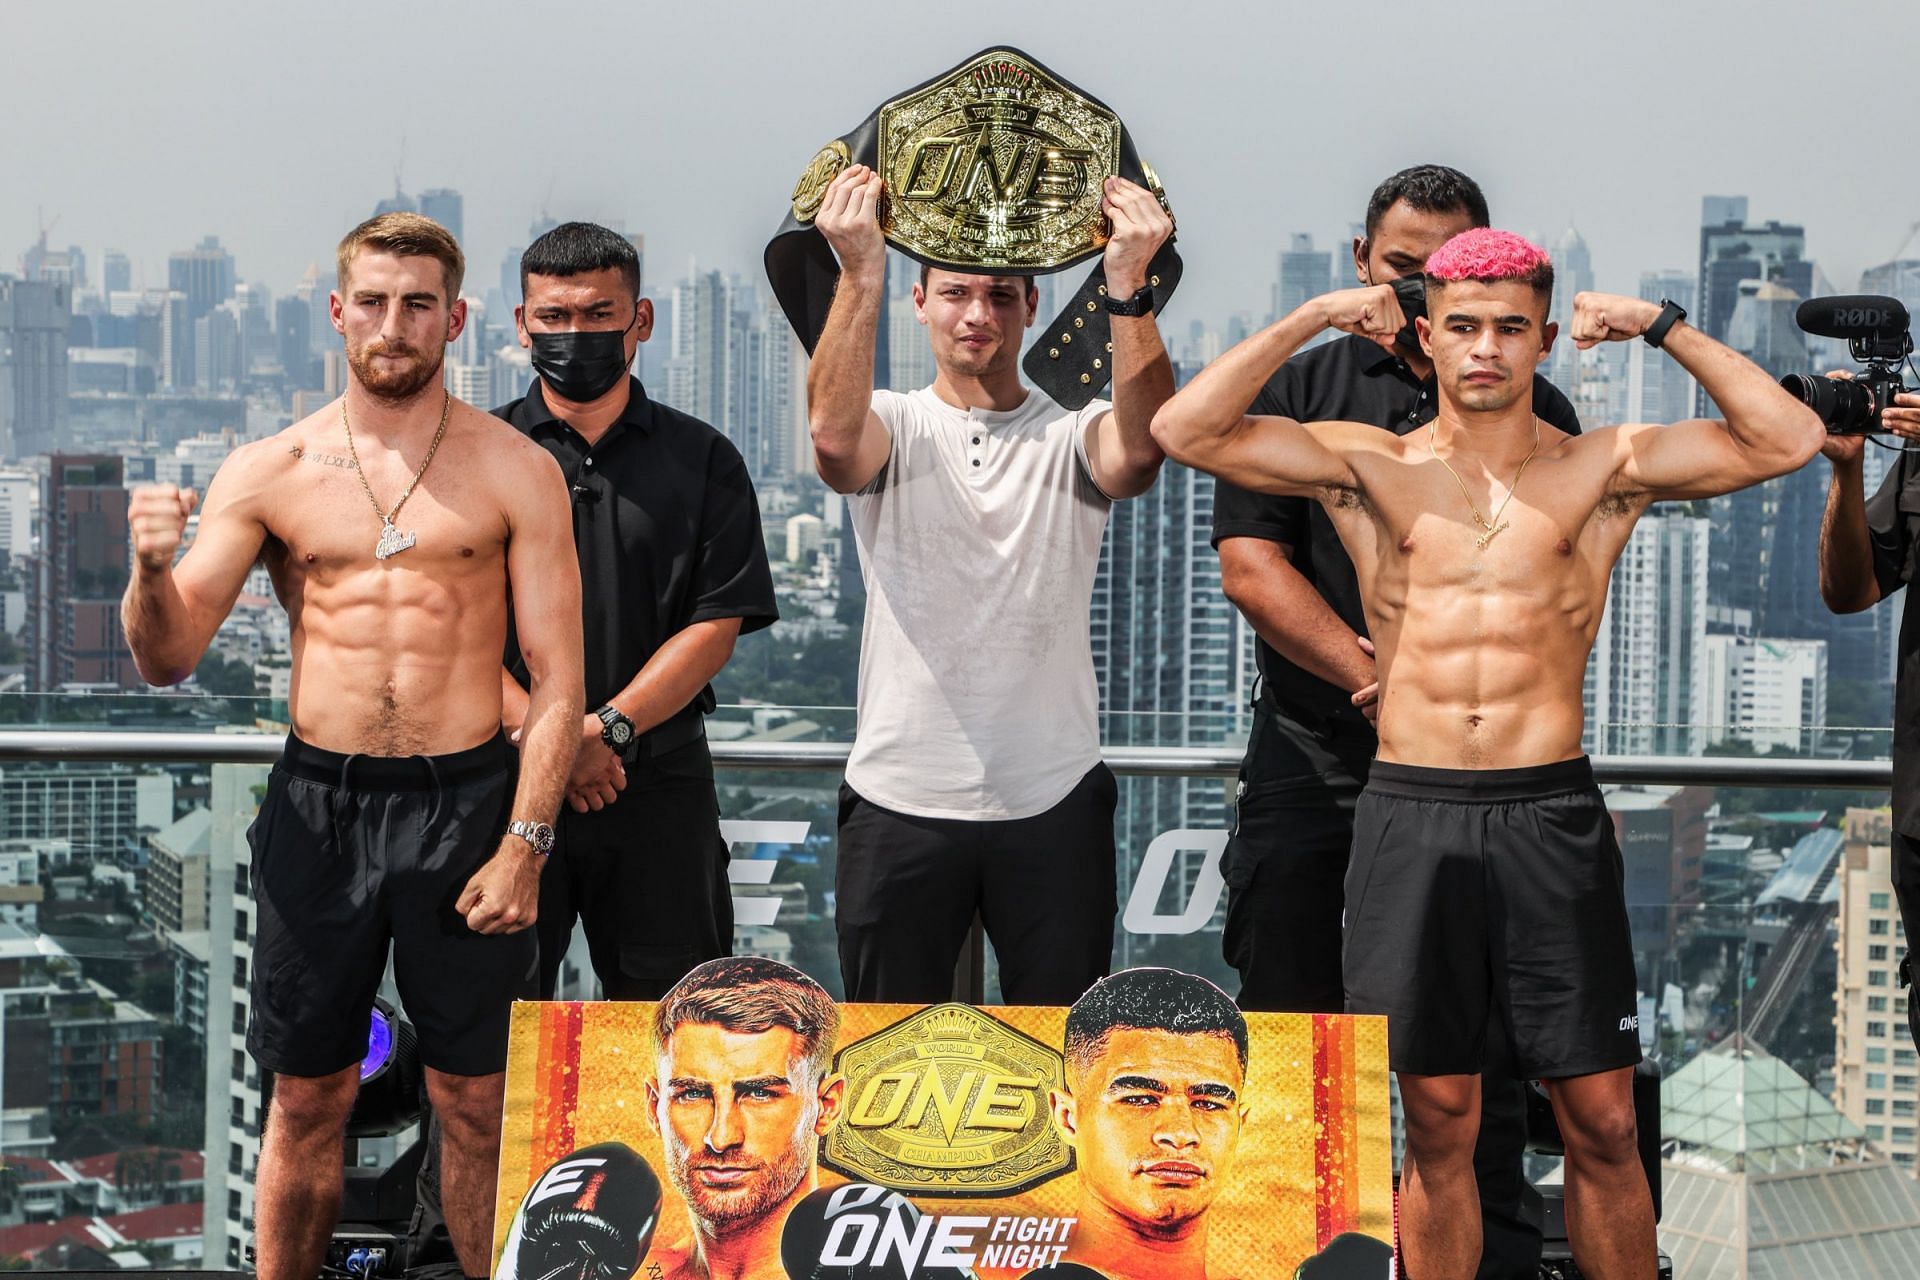 Jonathan Haggerty (left) and Fabricio Andrade at the ONE Fight Night 16 ceremonial weigh-ins ahead of their bantamweight kickboxing title fight in November 2023.